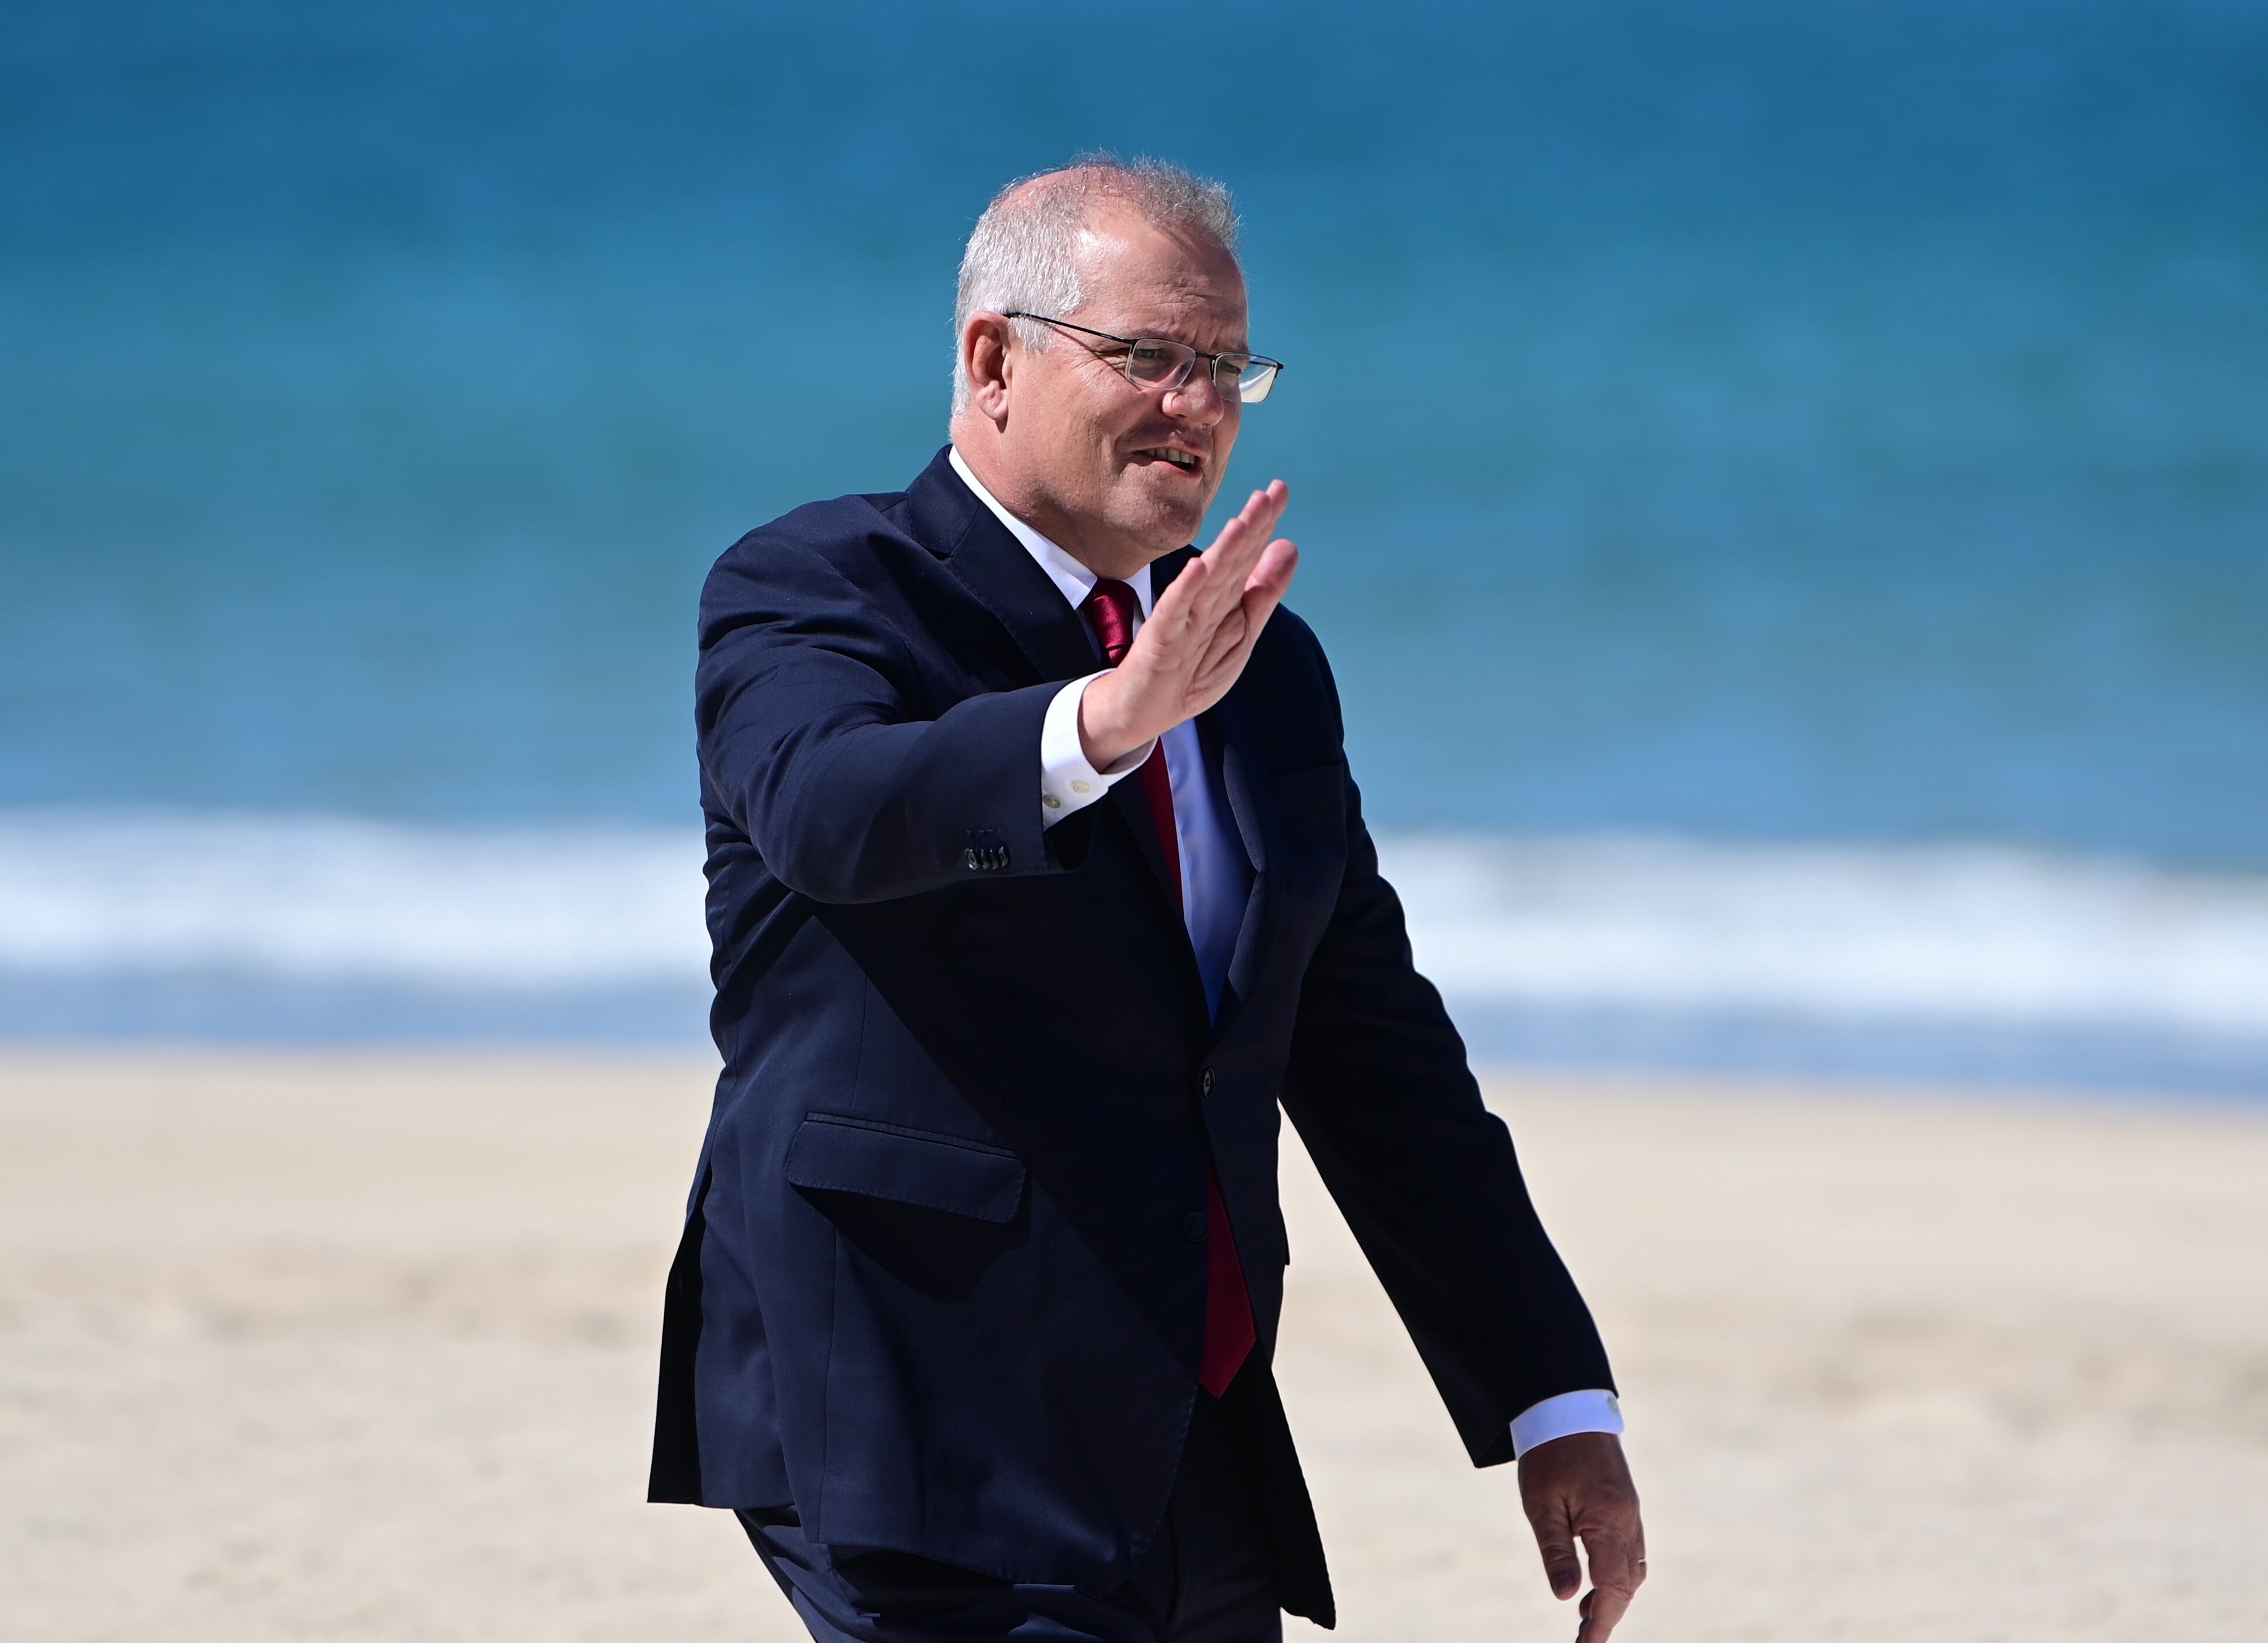 Prime Minister Scott Morrison during the G7 Summit in Carbis Bay, Britain.